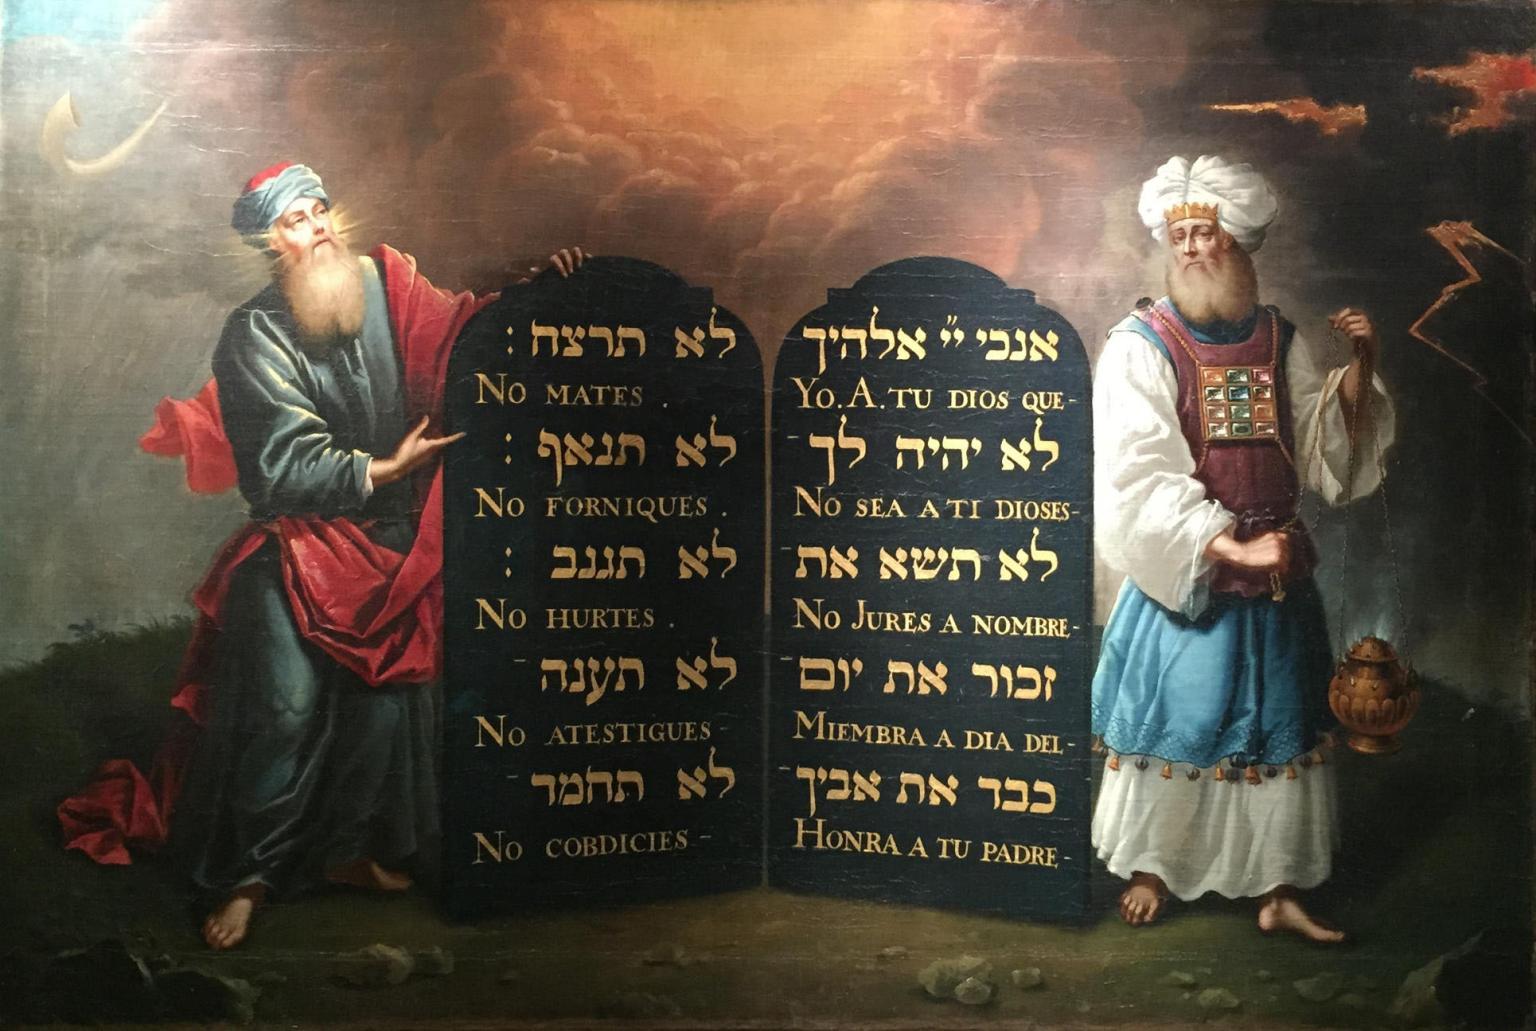 Painting of two bearded men in robes, one on each side of large tablets with Hebrew and Spanish text. 